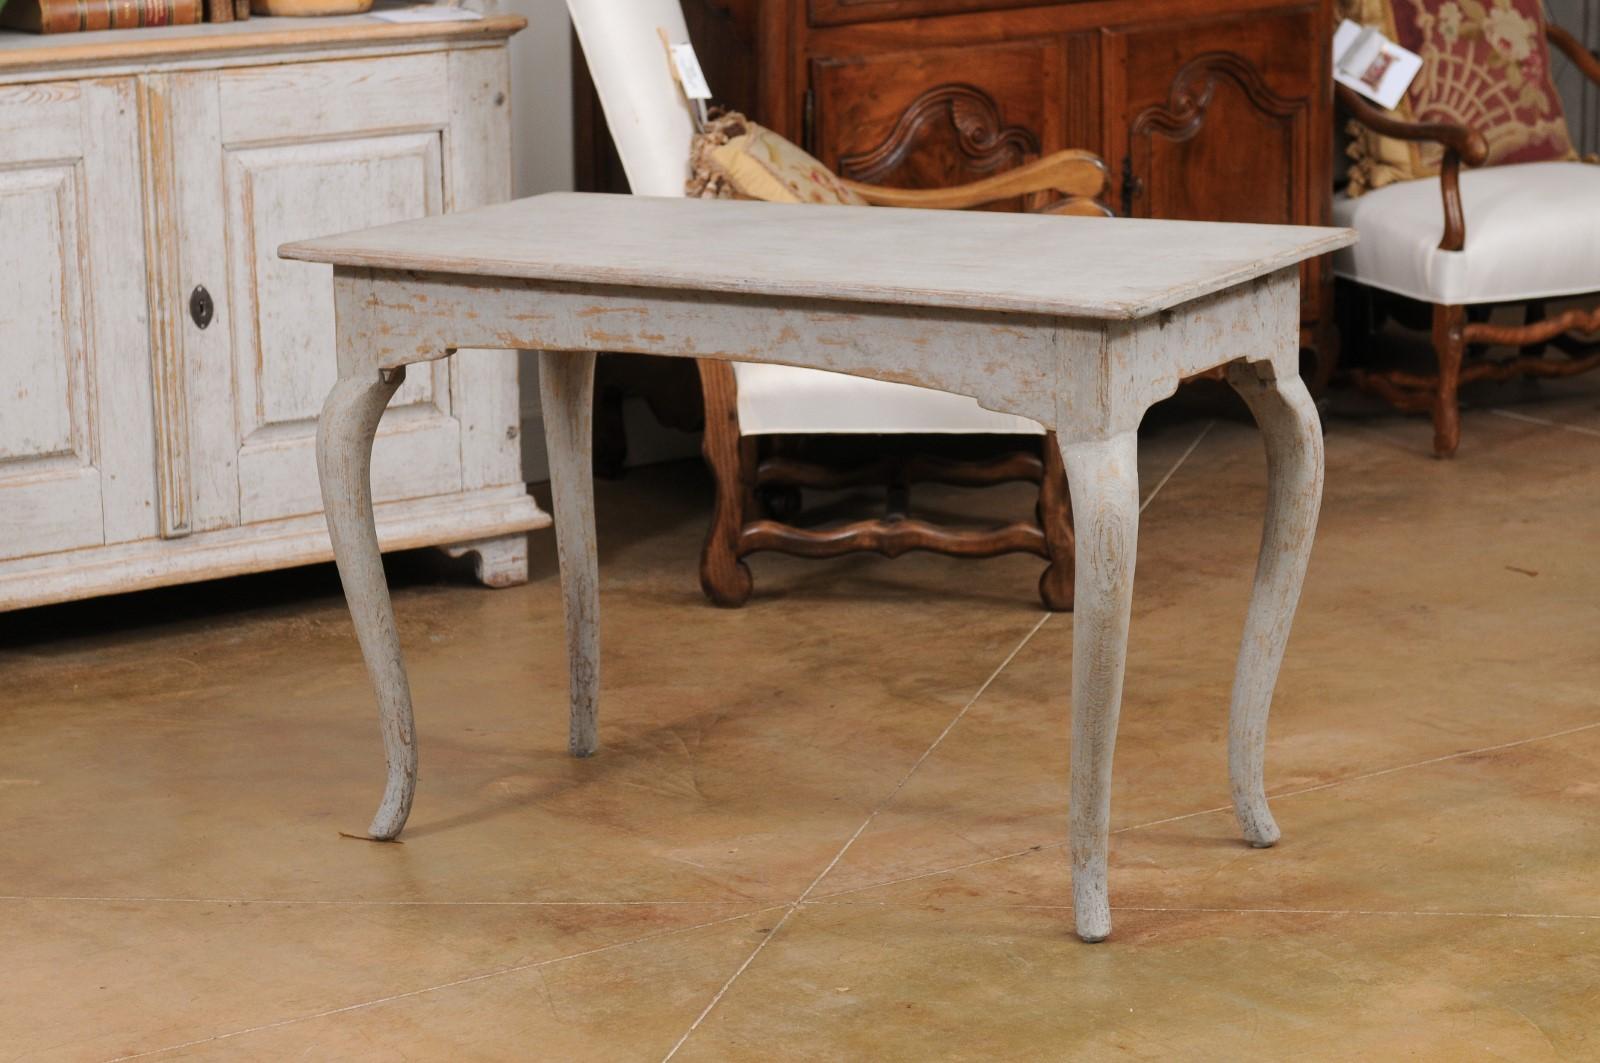 Wood Swedish 1780s Rococo Period Table with Cabriole Legs and Distressed Finish